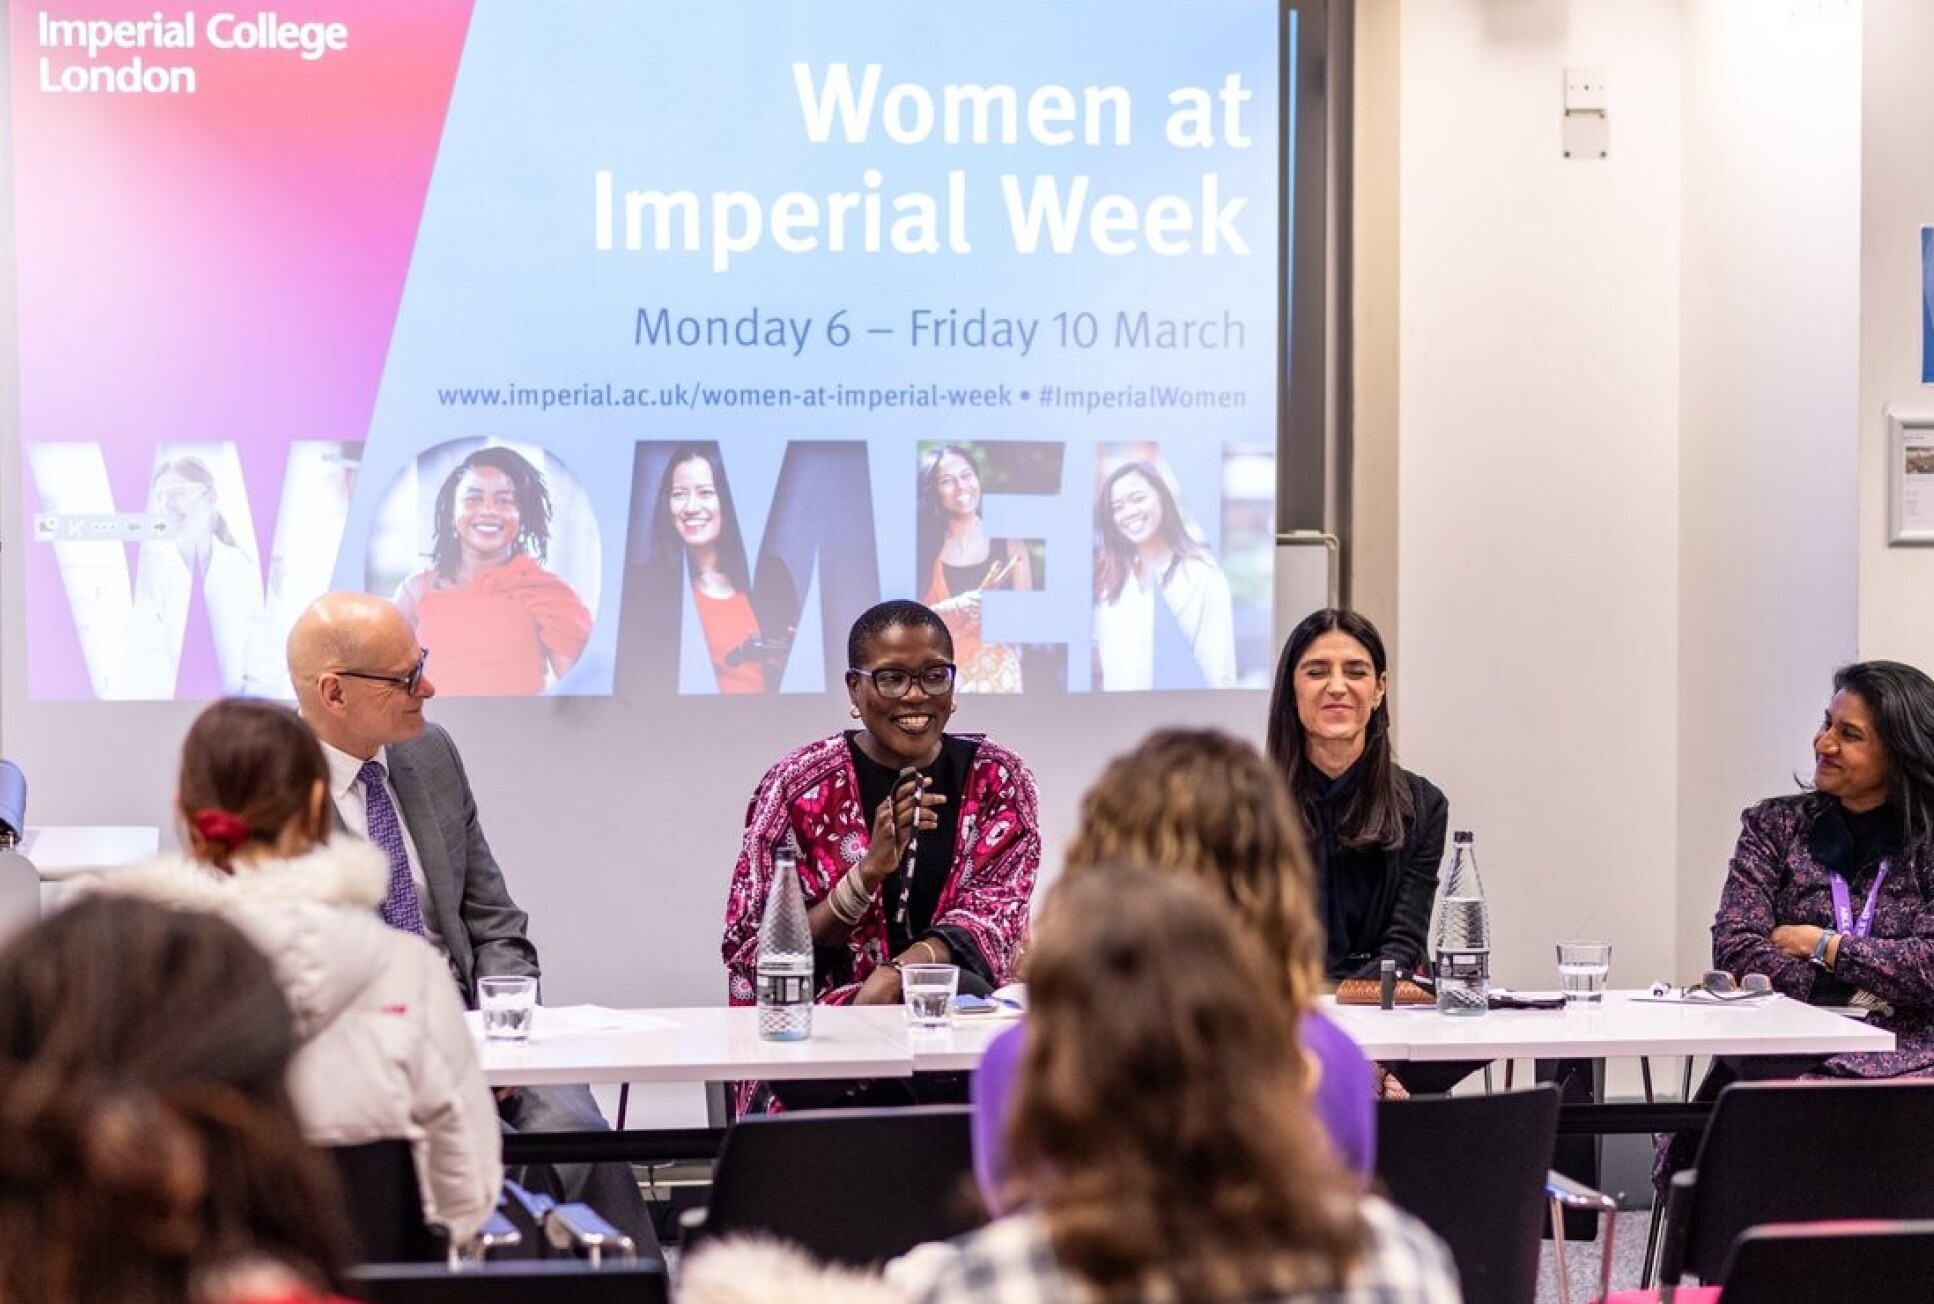 Prof Julie Makani with Professor Alessandra Luati, Mathematics and Professor Priscilla Reddy, Public Health and EDI talking at the Imperial Women in STEM event for Women at Imperial Week.